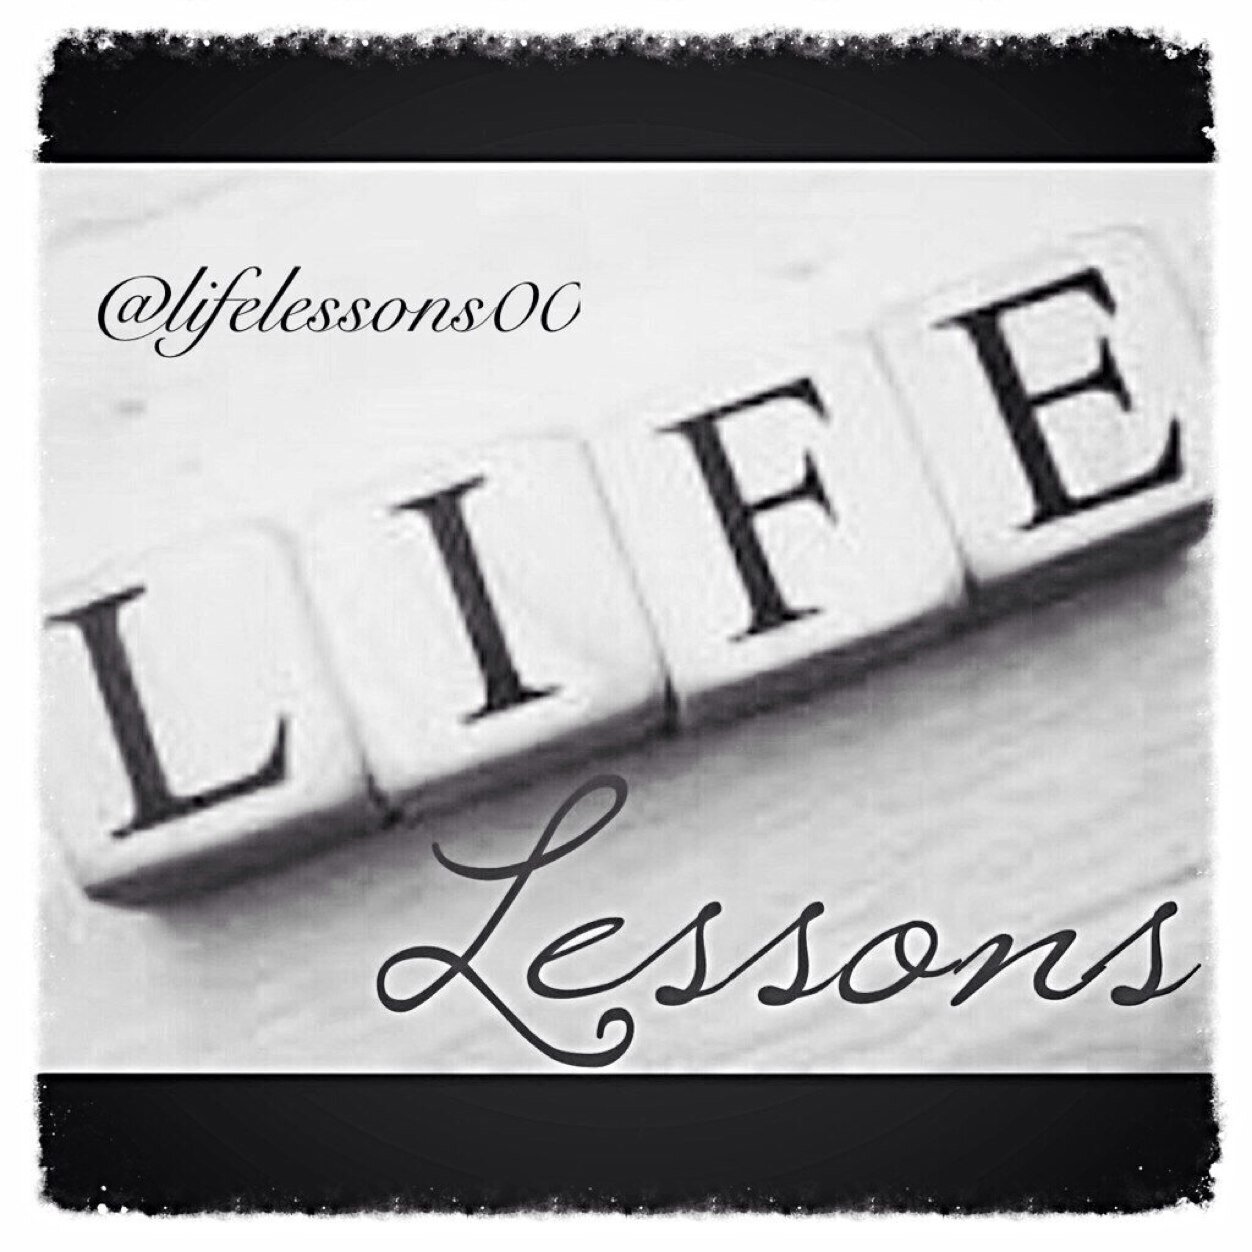 Send in quotes about things you have learned in your life and we will post them. We also give helpful daily advice. 
Also use ask.fm--- @lifelessons00